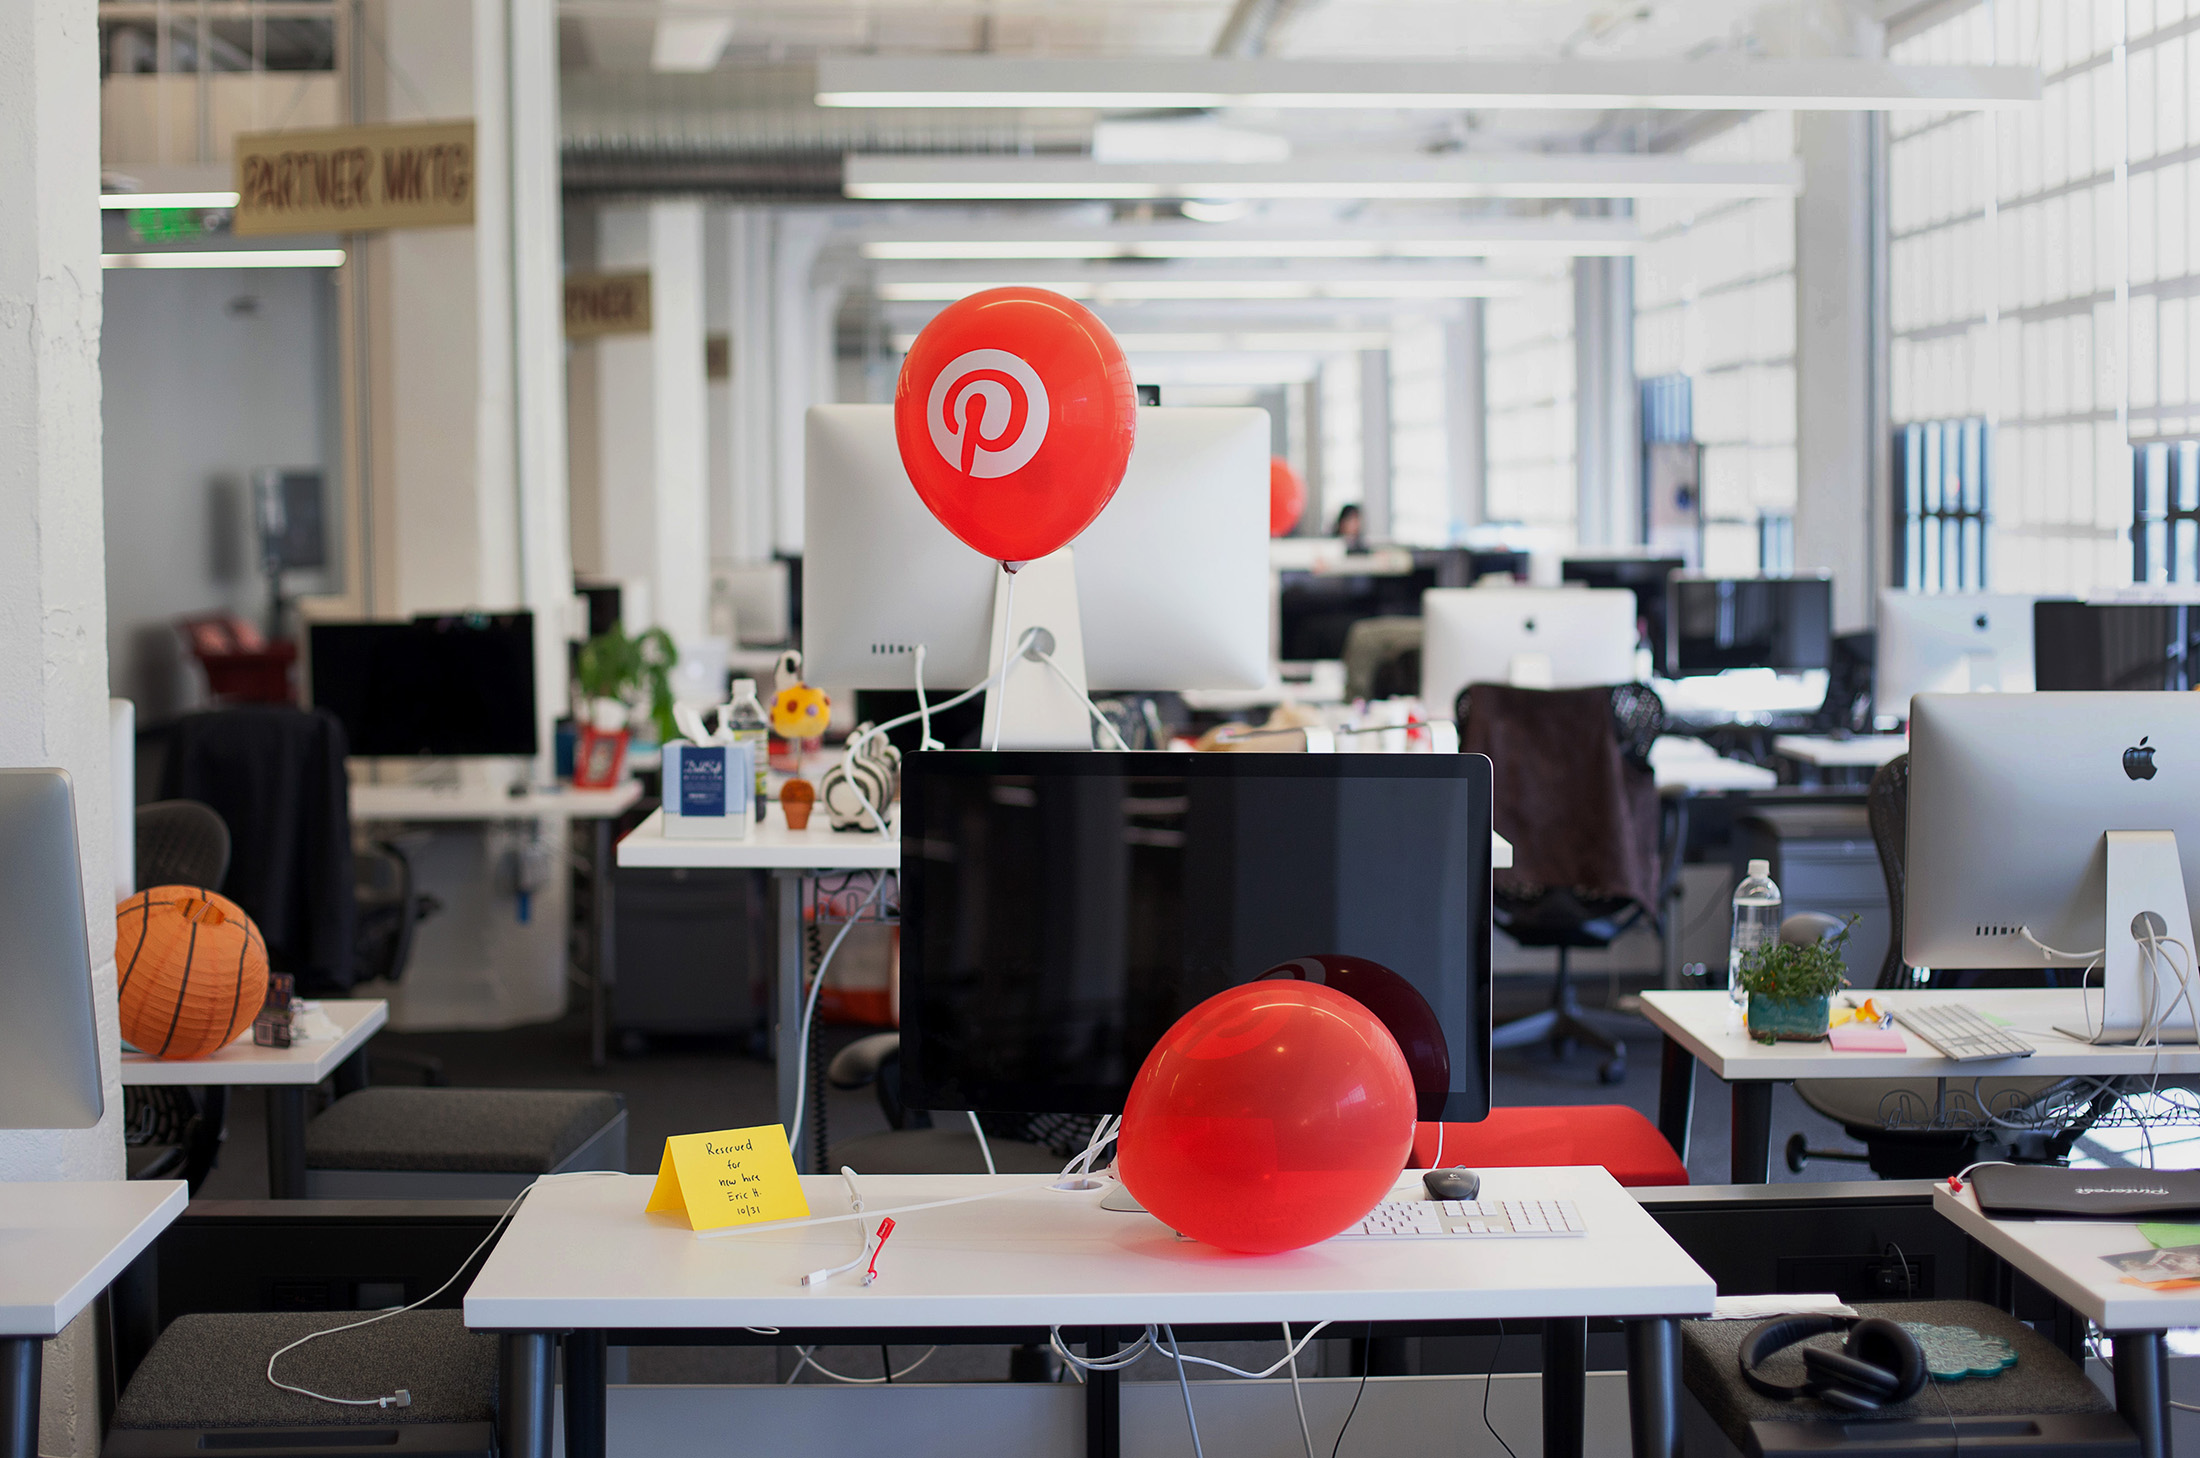 The Pinterest Inc. logo is seen on a balloon displayed to welcome new hires at the company's second office space, located near headquarters, in San Francisco, California, U.S., on Monday, Nov. 3, 2014. Pinterest Inc. is trying to teach businesses how to better use its online scrapbooking site, as the company takes steps to generate more revenue to justify its $5 billion valuation. The San Francisco-based company unveiled a set of free tools that marketers can use to determine which of their posts are working on Pinterest.
